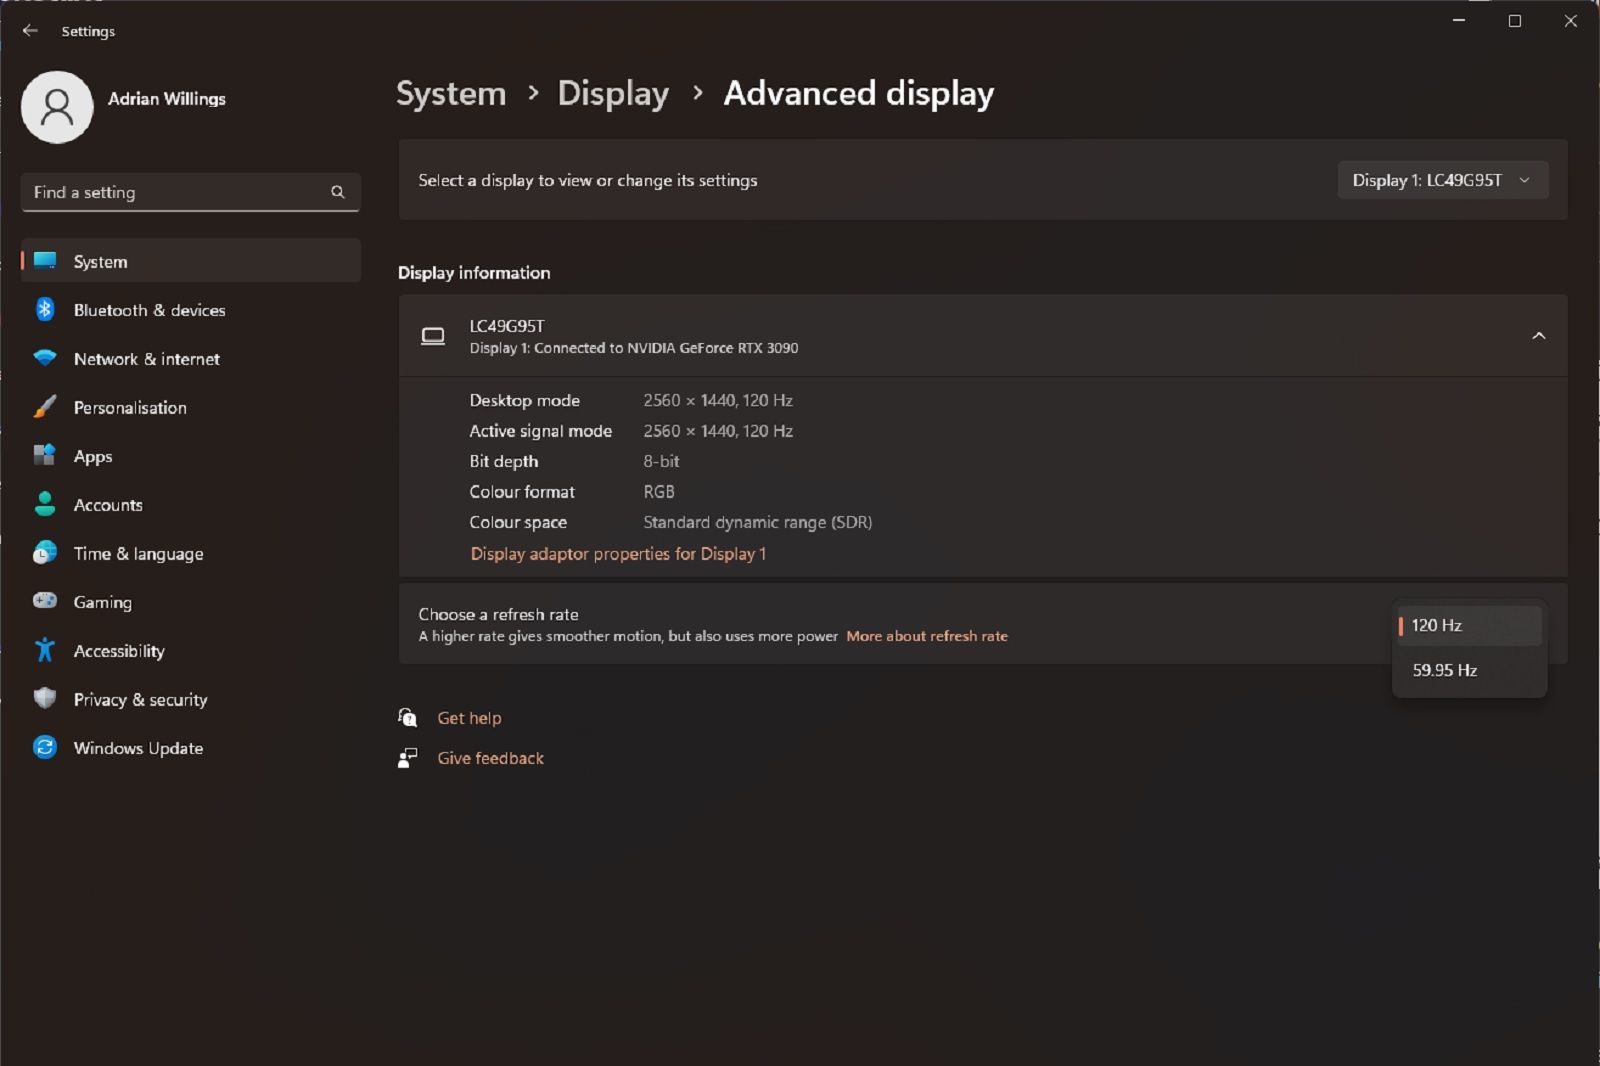 How to optimize your PC for gaming image 10